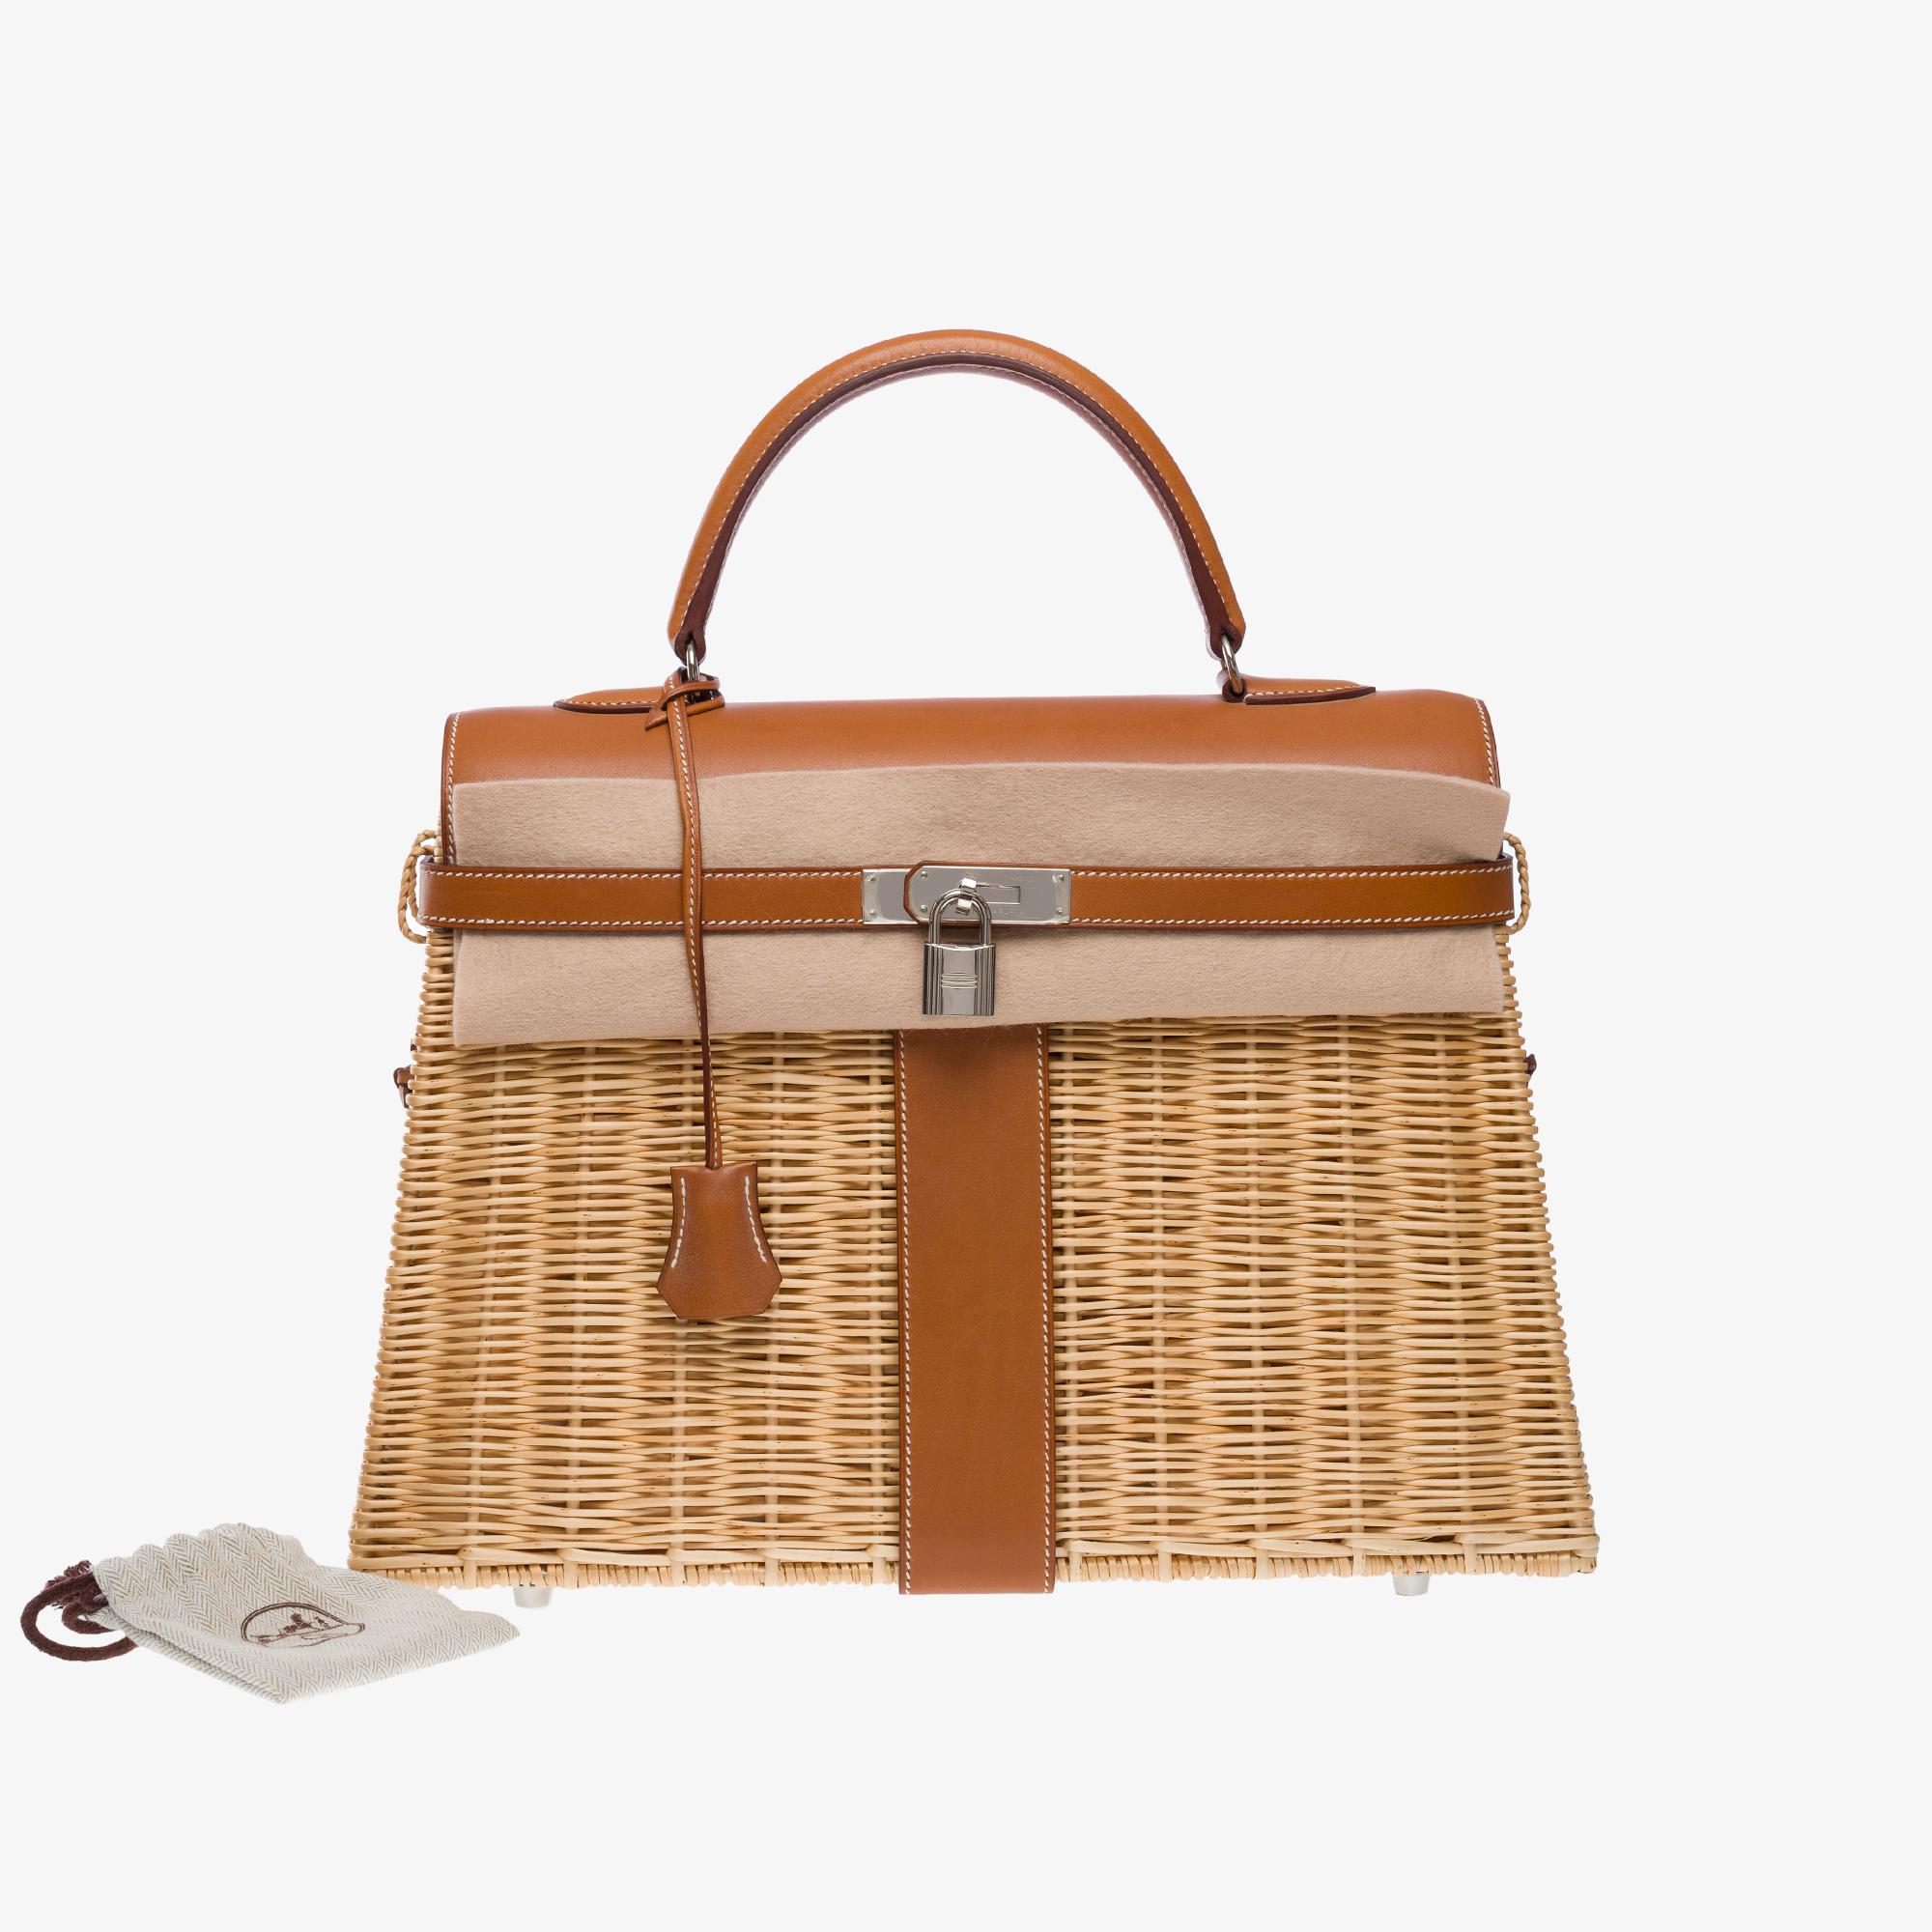 Fantastic​ ​&​ ​Rare​ ​Hermes​ ​Kelly​ ​35​​ ​Picnic​ ​in​ ​wicker​ ​and​ ​Barenia​ ​leather​ ​with​ ​white​ ​stitching,​ ​palladium​ ​silver​ ​metal​ ​hardware,​ ​brown​ ​Barenia​ ​leather​ ​handle​ ​allowing​ ​a​ ​hand​ ​carry

Flap​